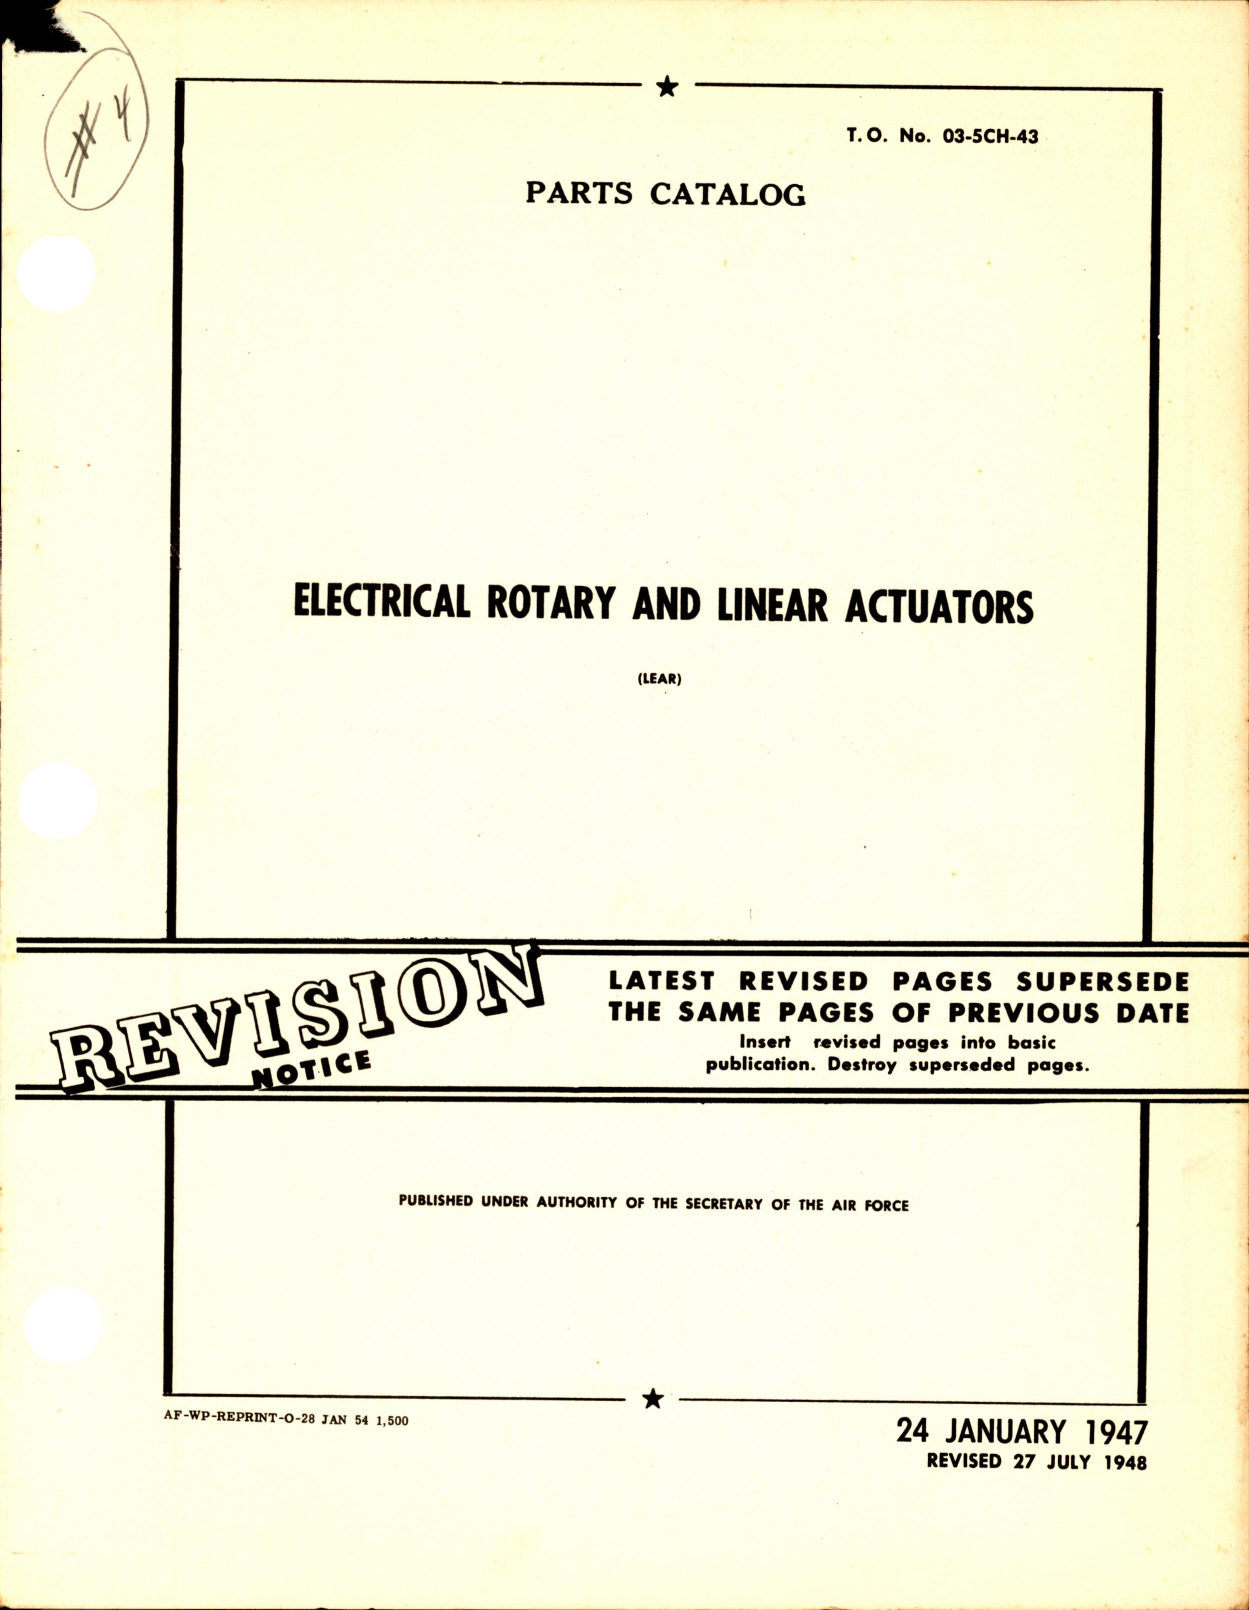 Sample page 1 from AirCorps Library document: Parts Catalog for Electrical Rotary and Linear Actuators